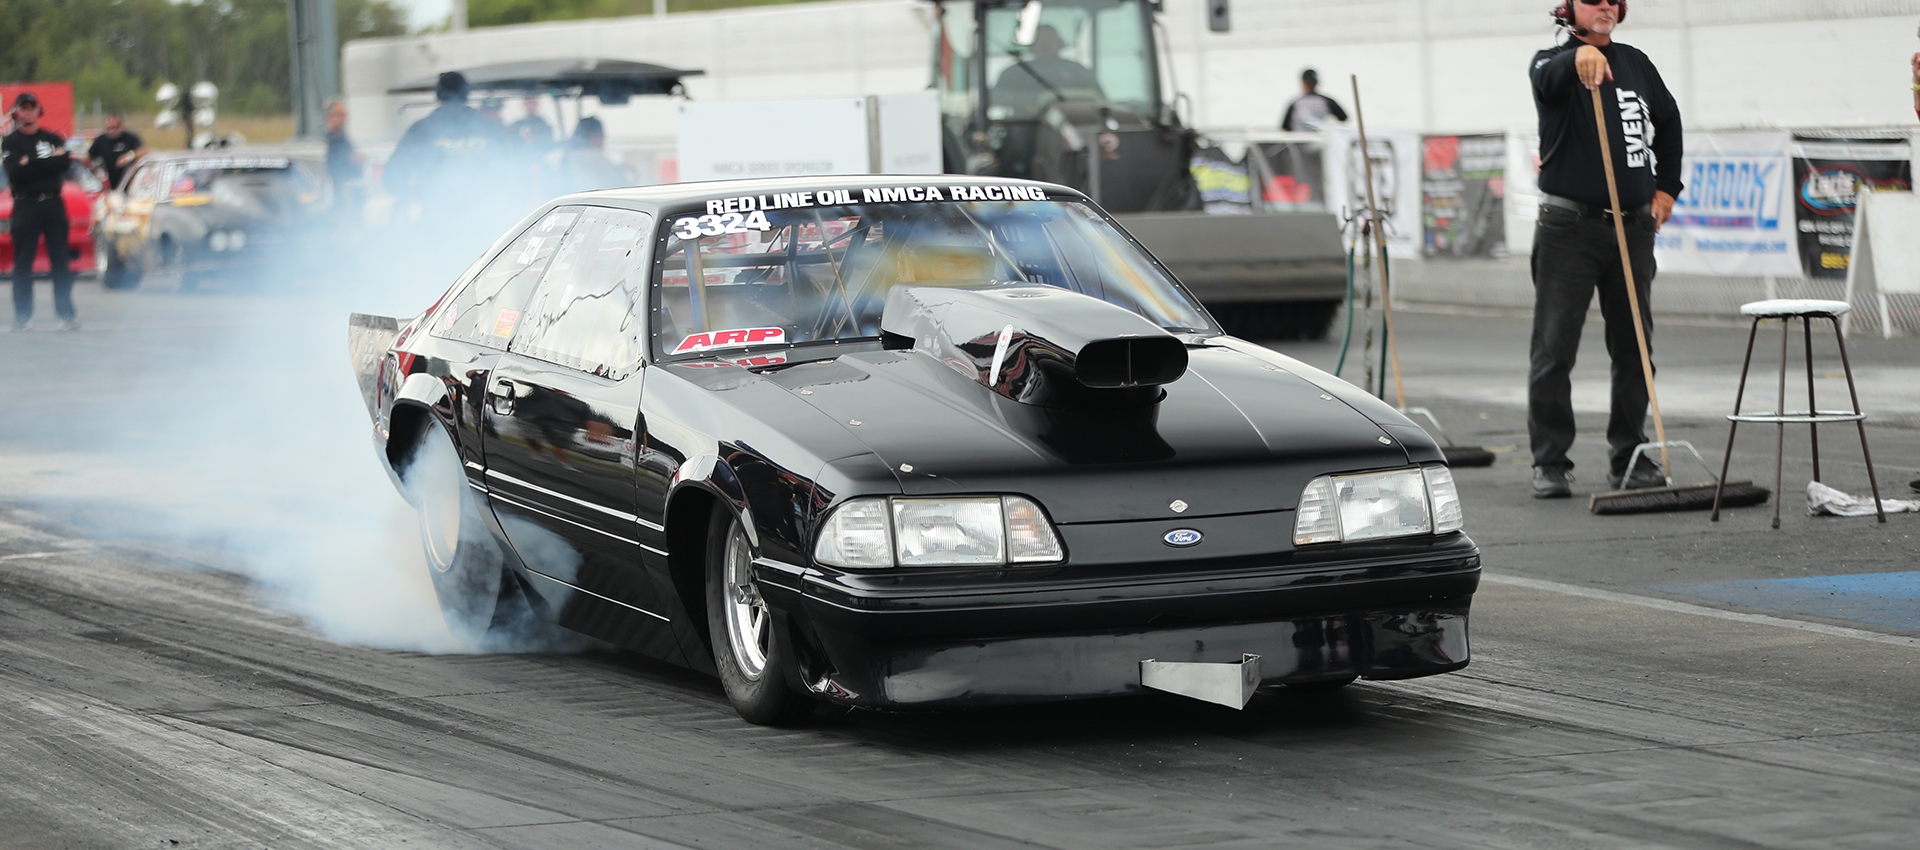 Billy Glidden Returned To NMCA Competition in Famous Fox Mustang